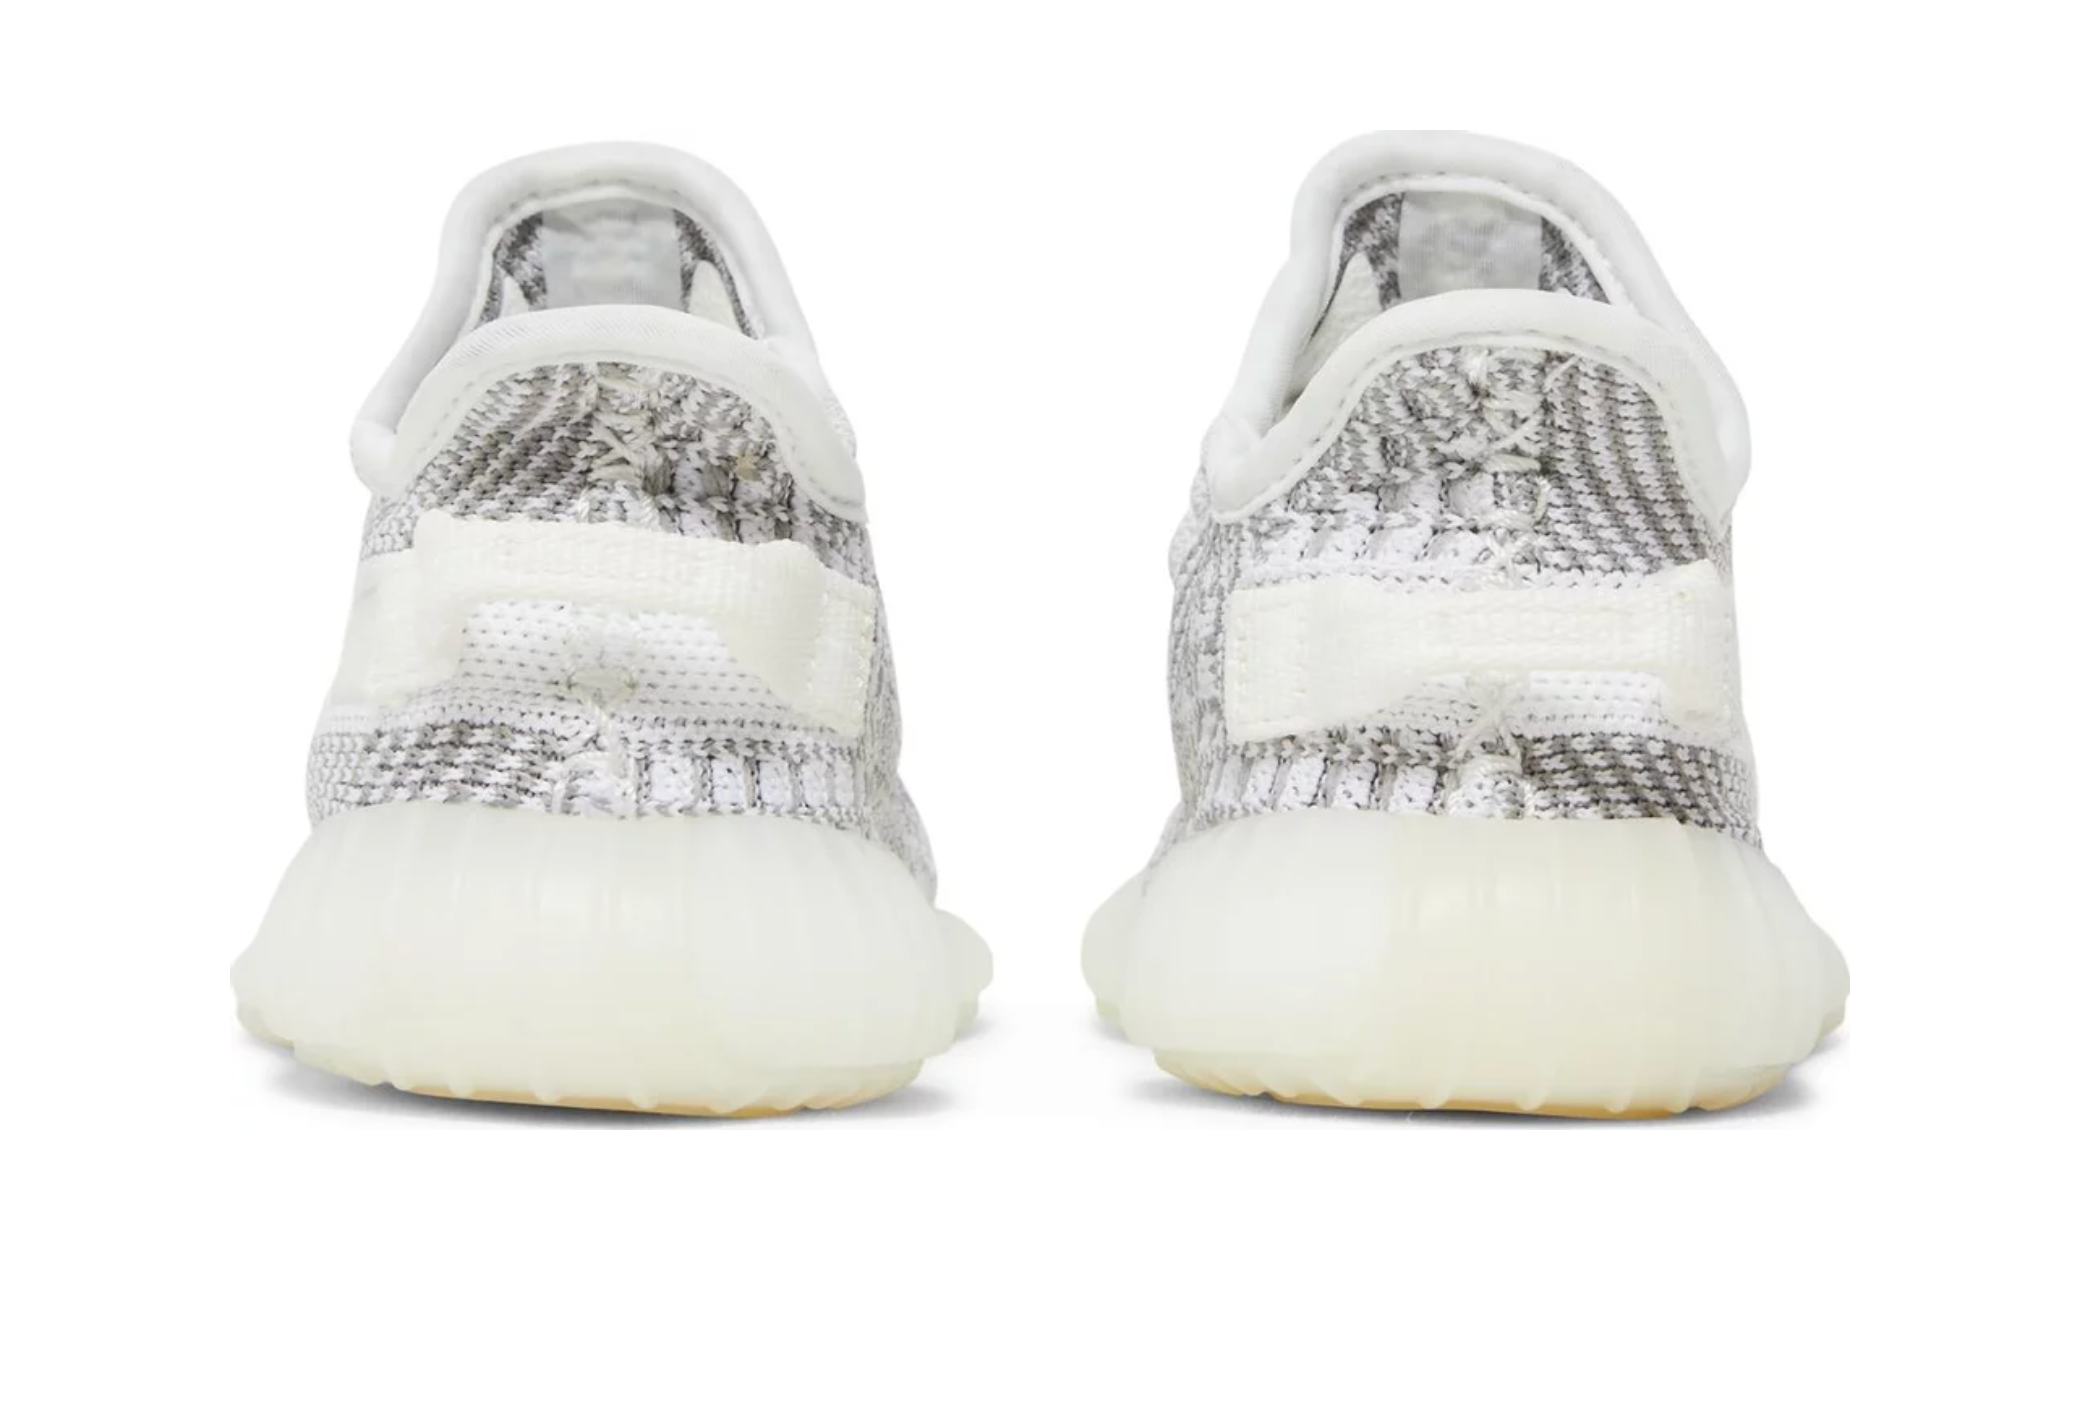 ADIDAS YEEZY BOOST 350 V2 STATIC (NON REFLECTIVE) (INFANTS)